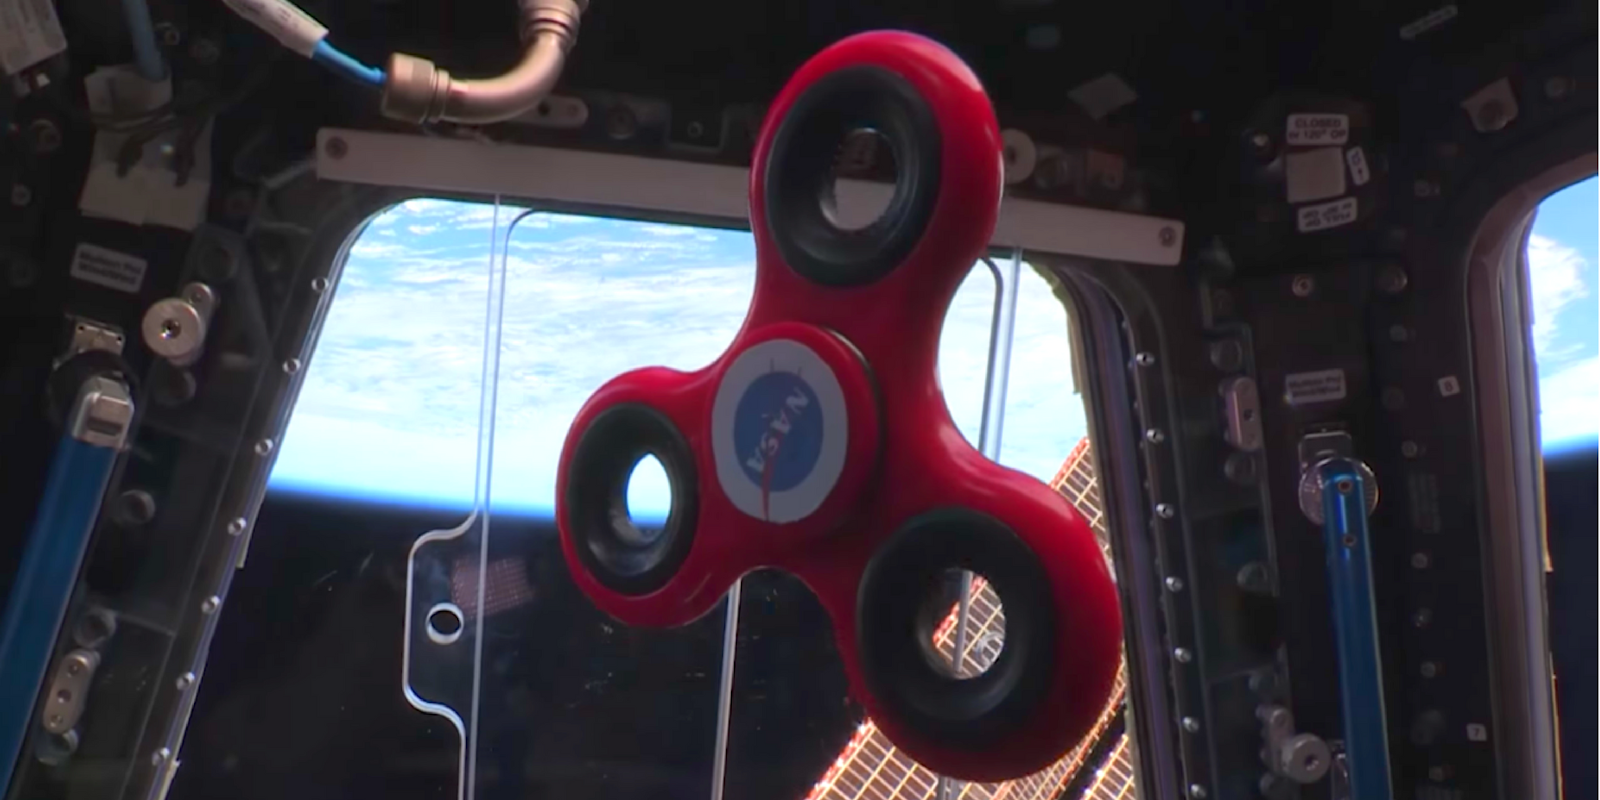 NASA international space station astronauts play with a fidget spinner in space.